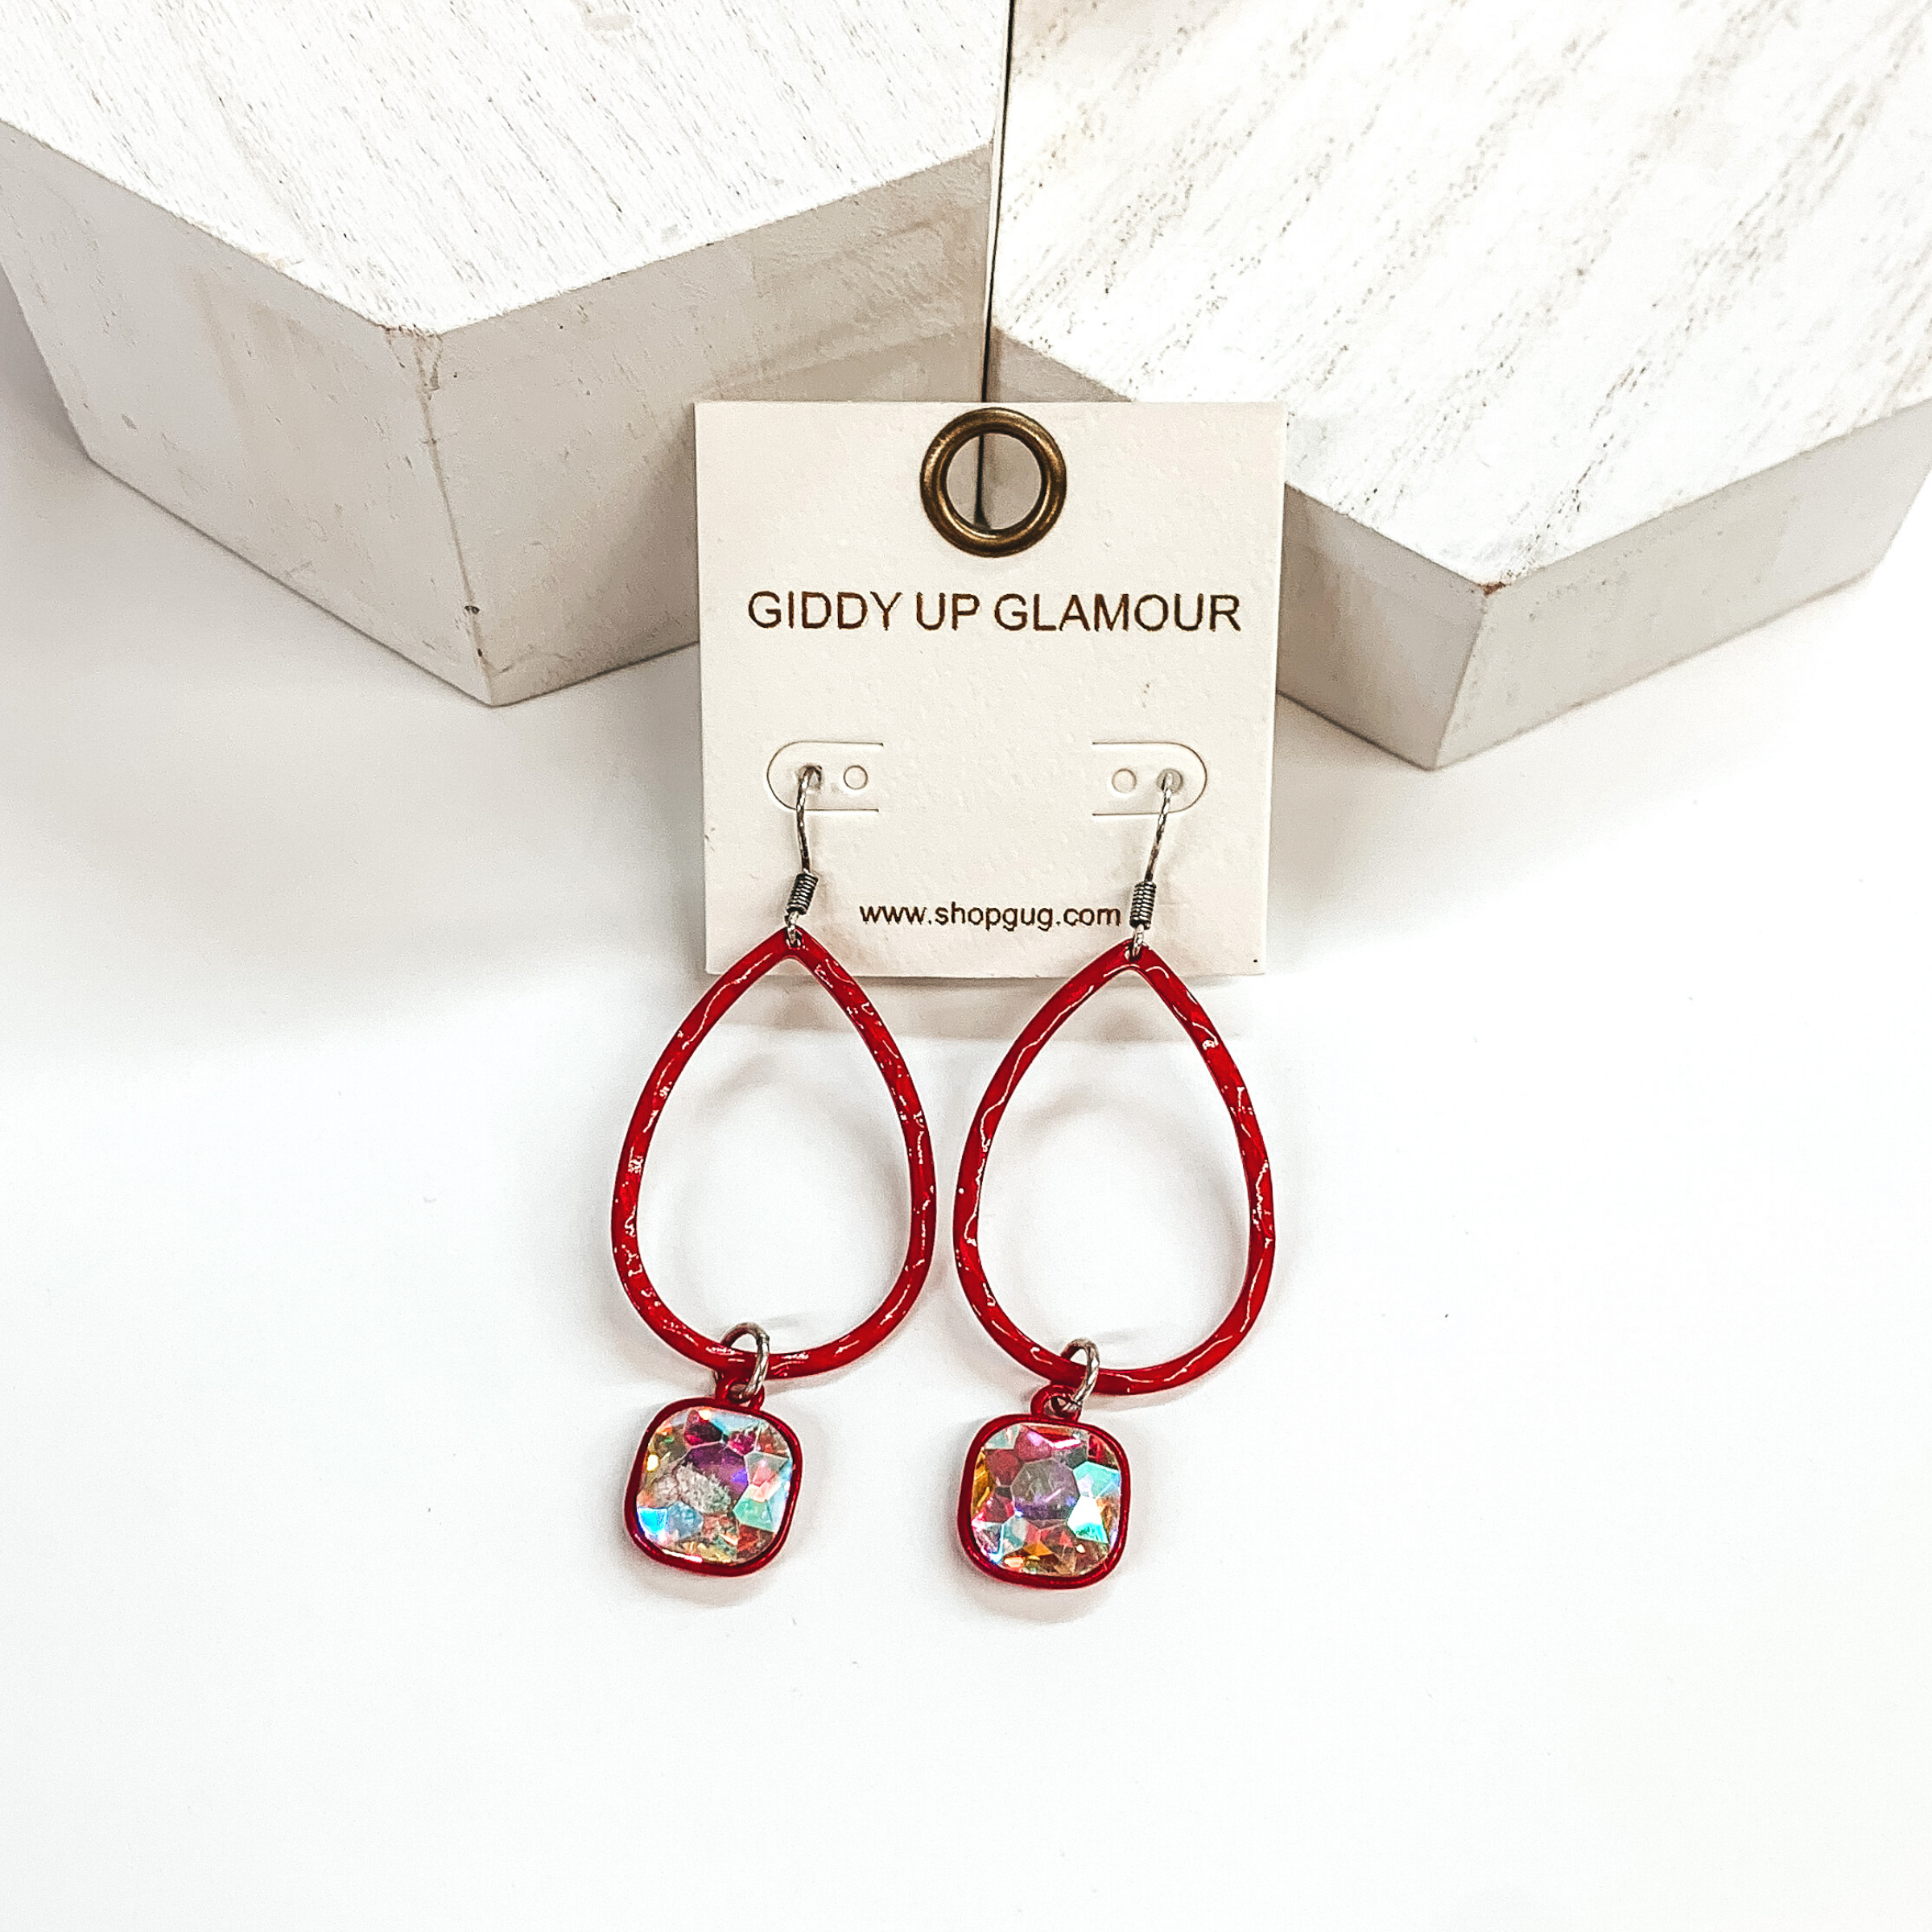 Red teardrop hammered earrings with a hanging cushion cut ab crystal. These earrings are pictured on a white background with white blocks at the top of the picture.